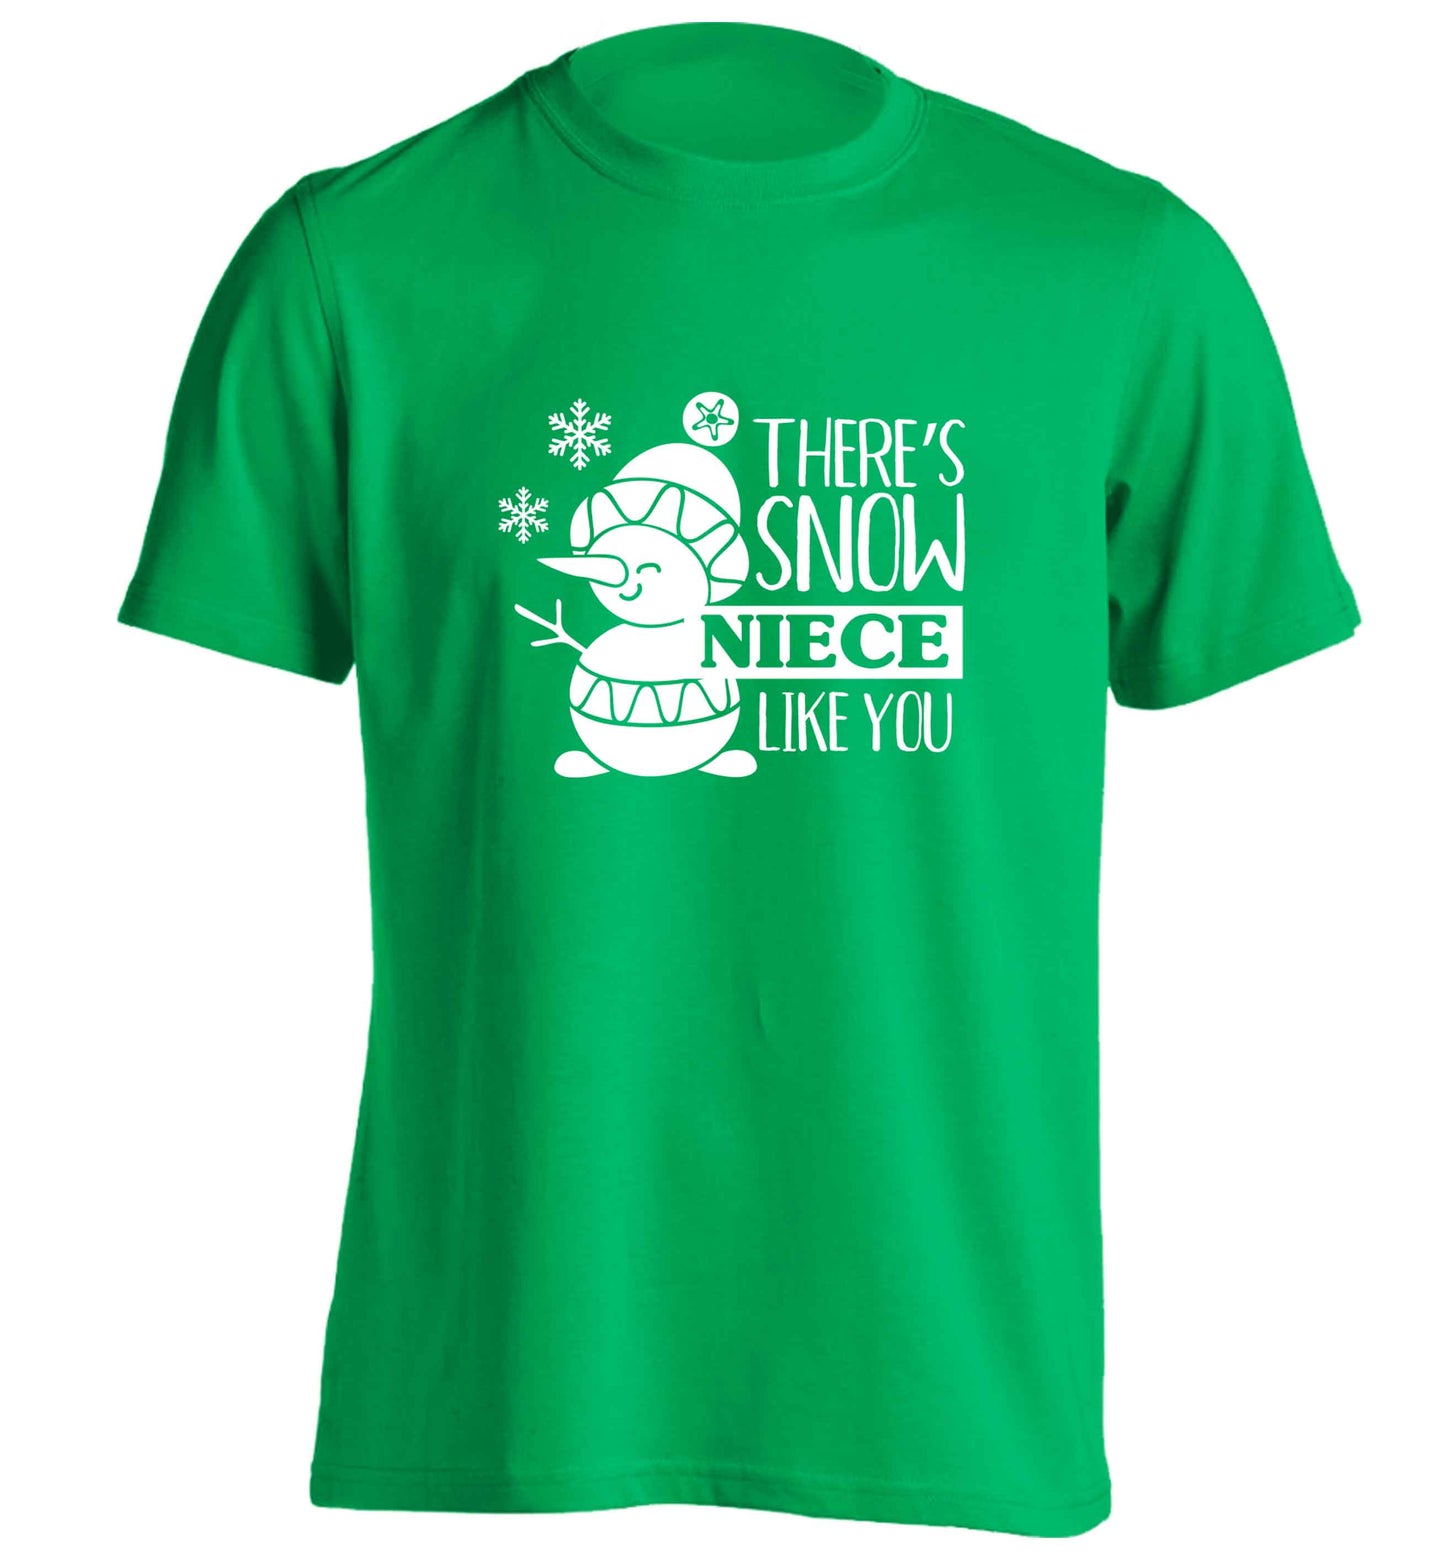 There's snow niece like you adults unisex green Tshirt 2XL